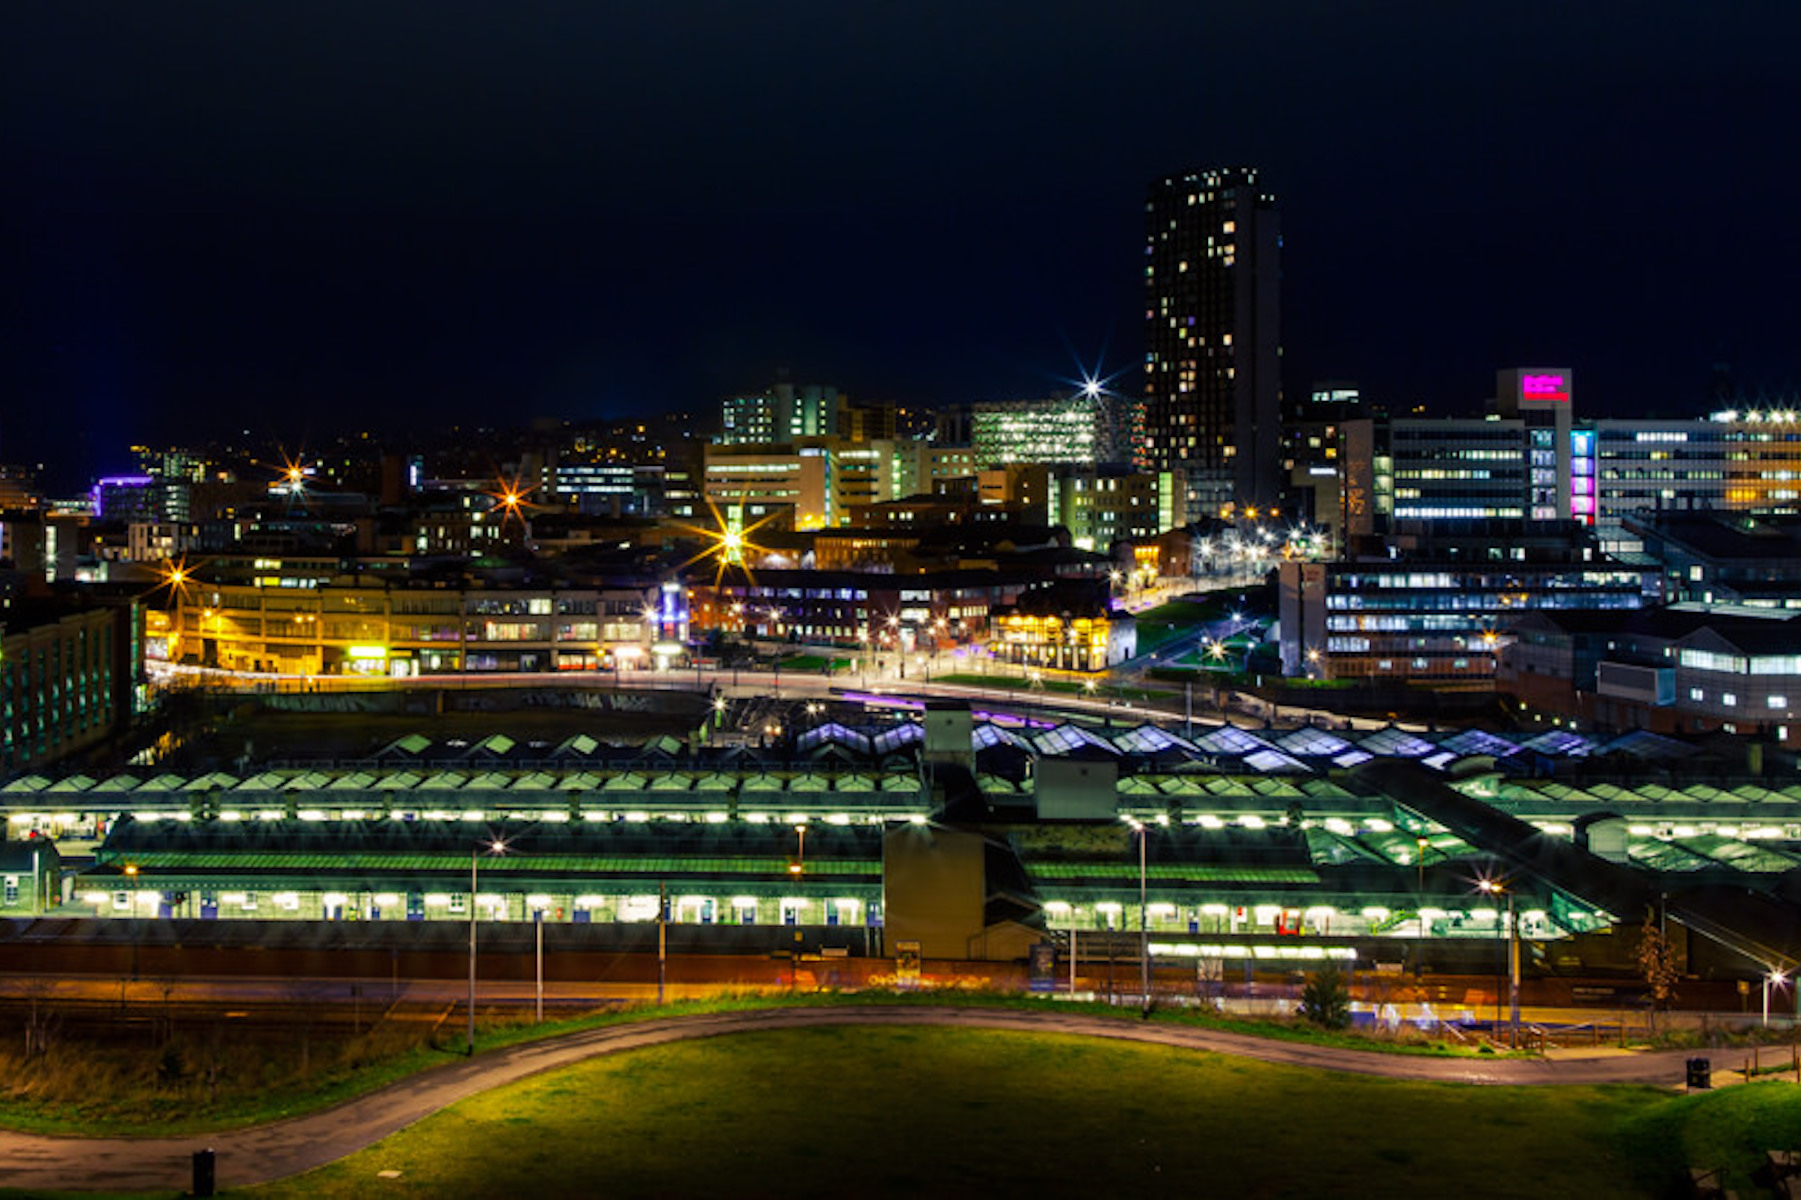 View across Sheffield at night